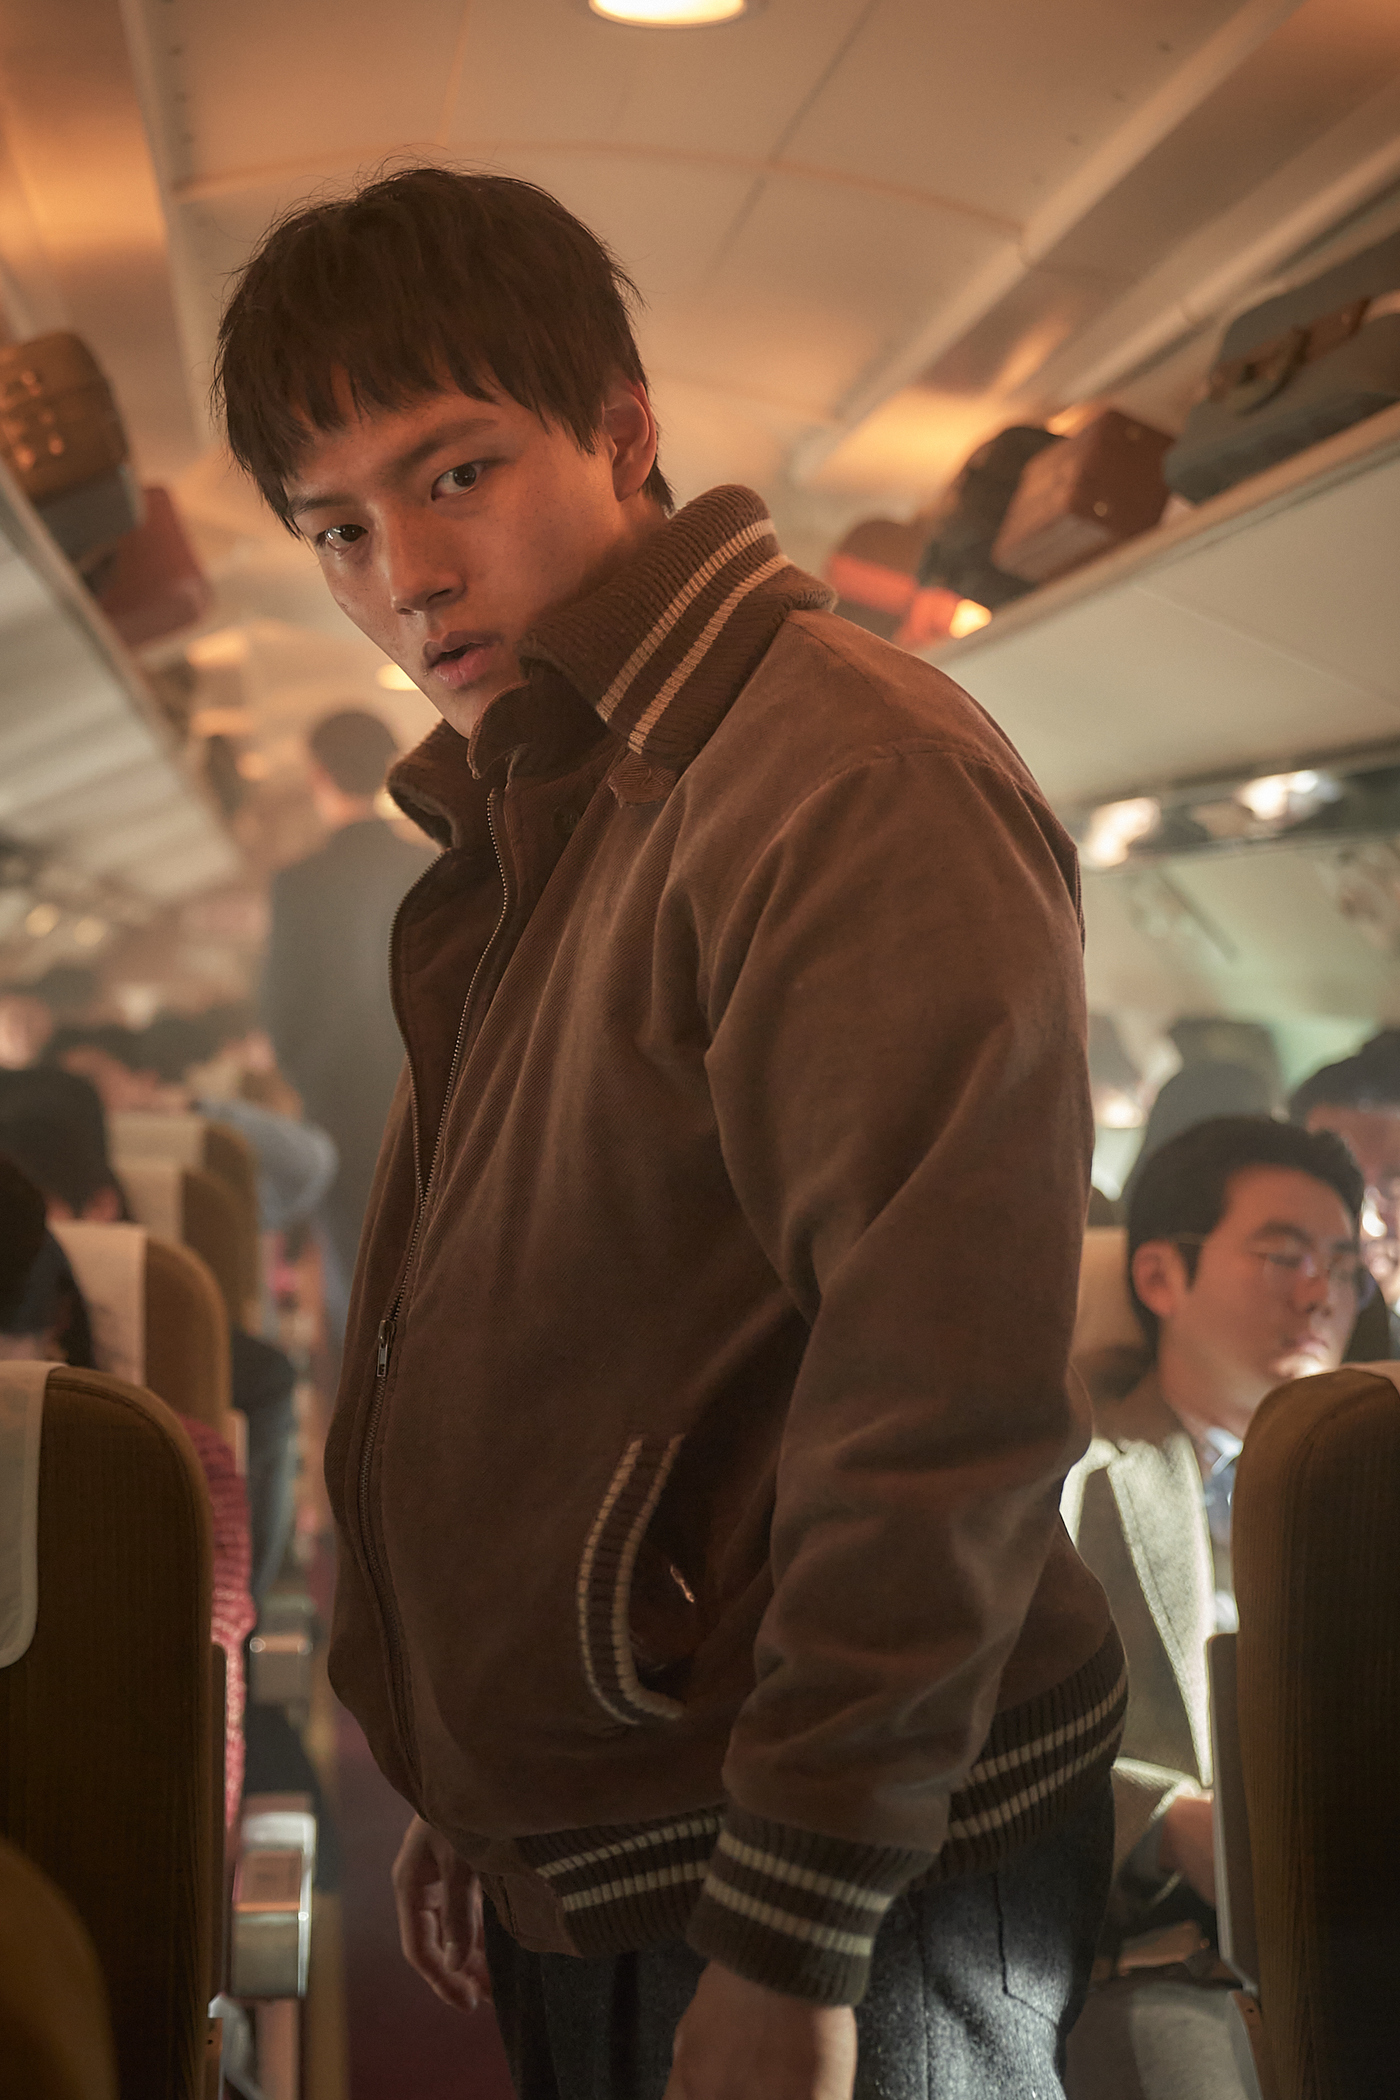 Yeo Jin Goo And Ha Jung Woo Are Trapped In A Hijacked Airplane In New Thriller Crime Film